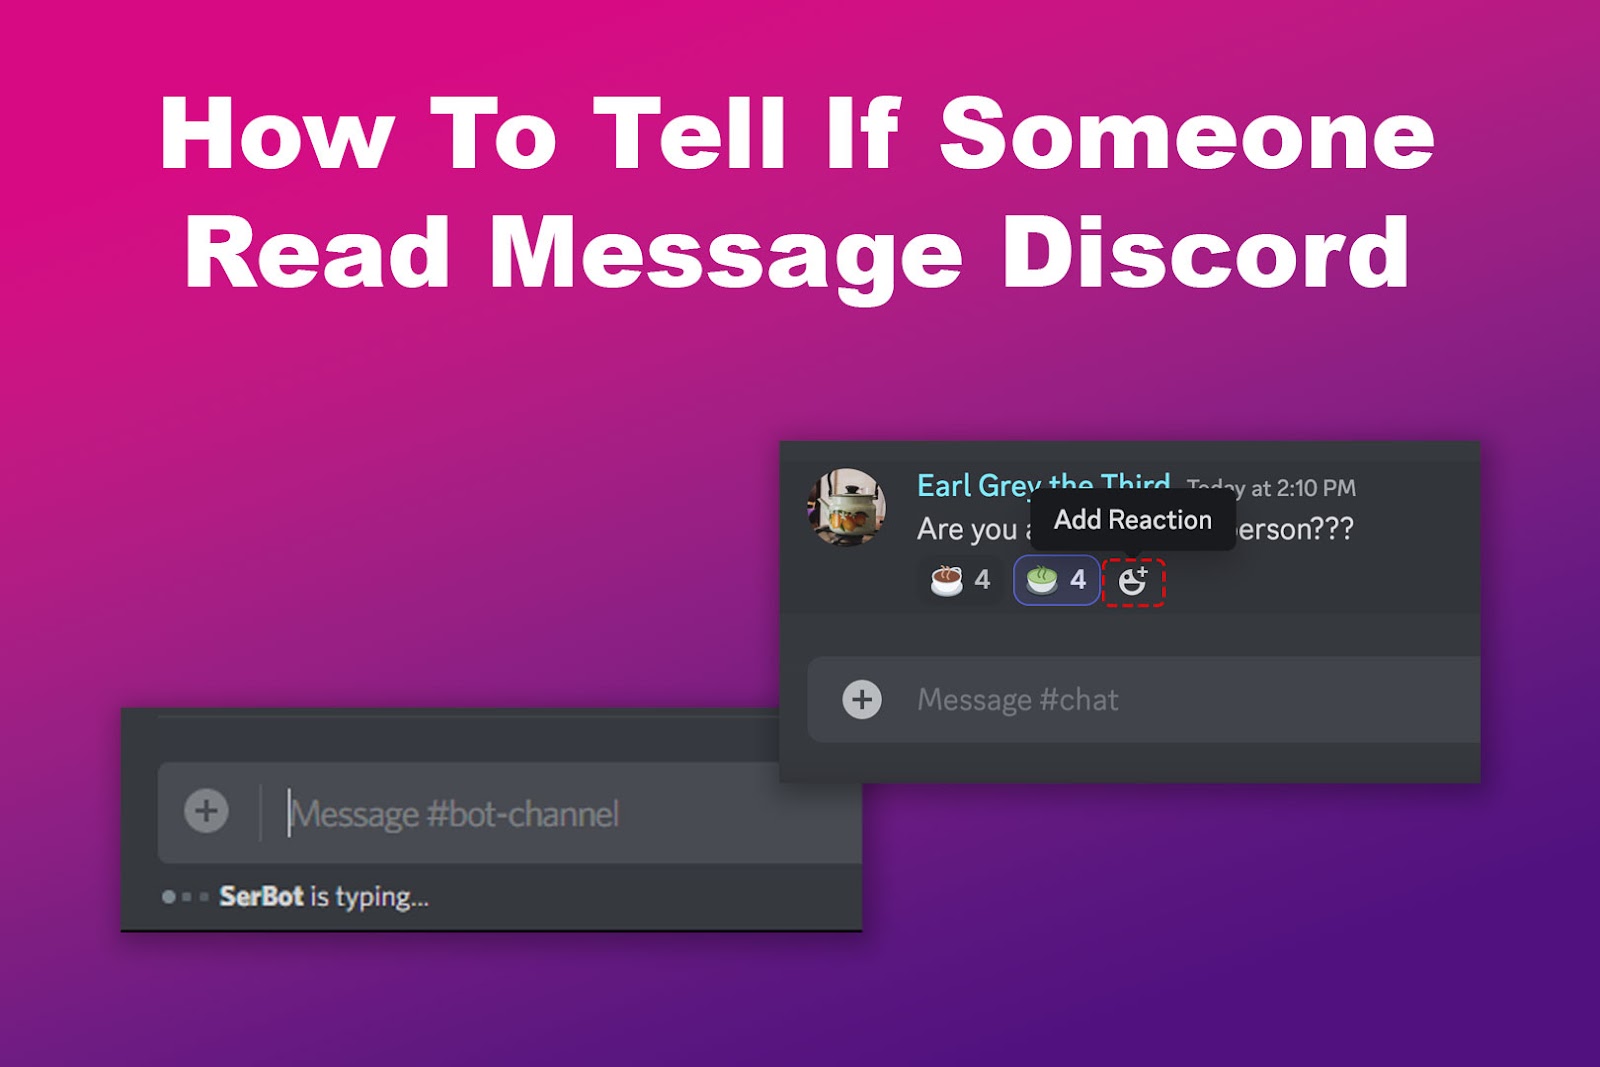 How To Tell If Someone Read Message Discord